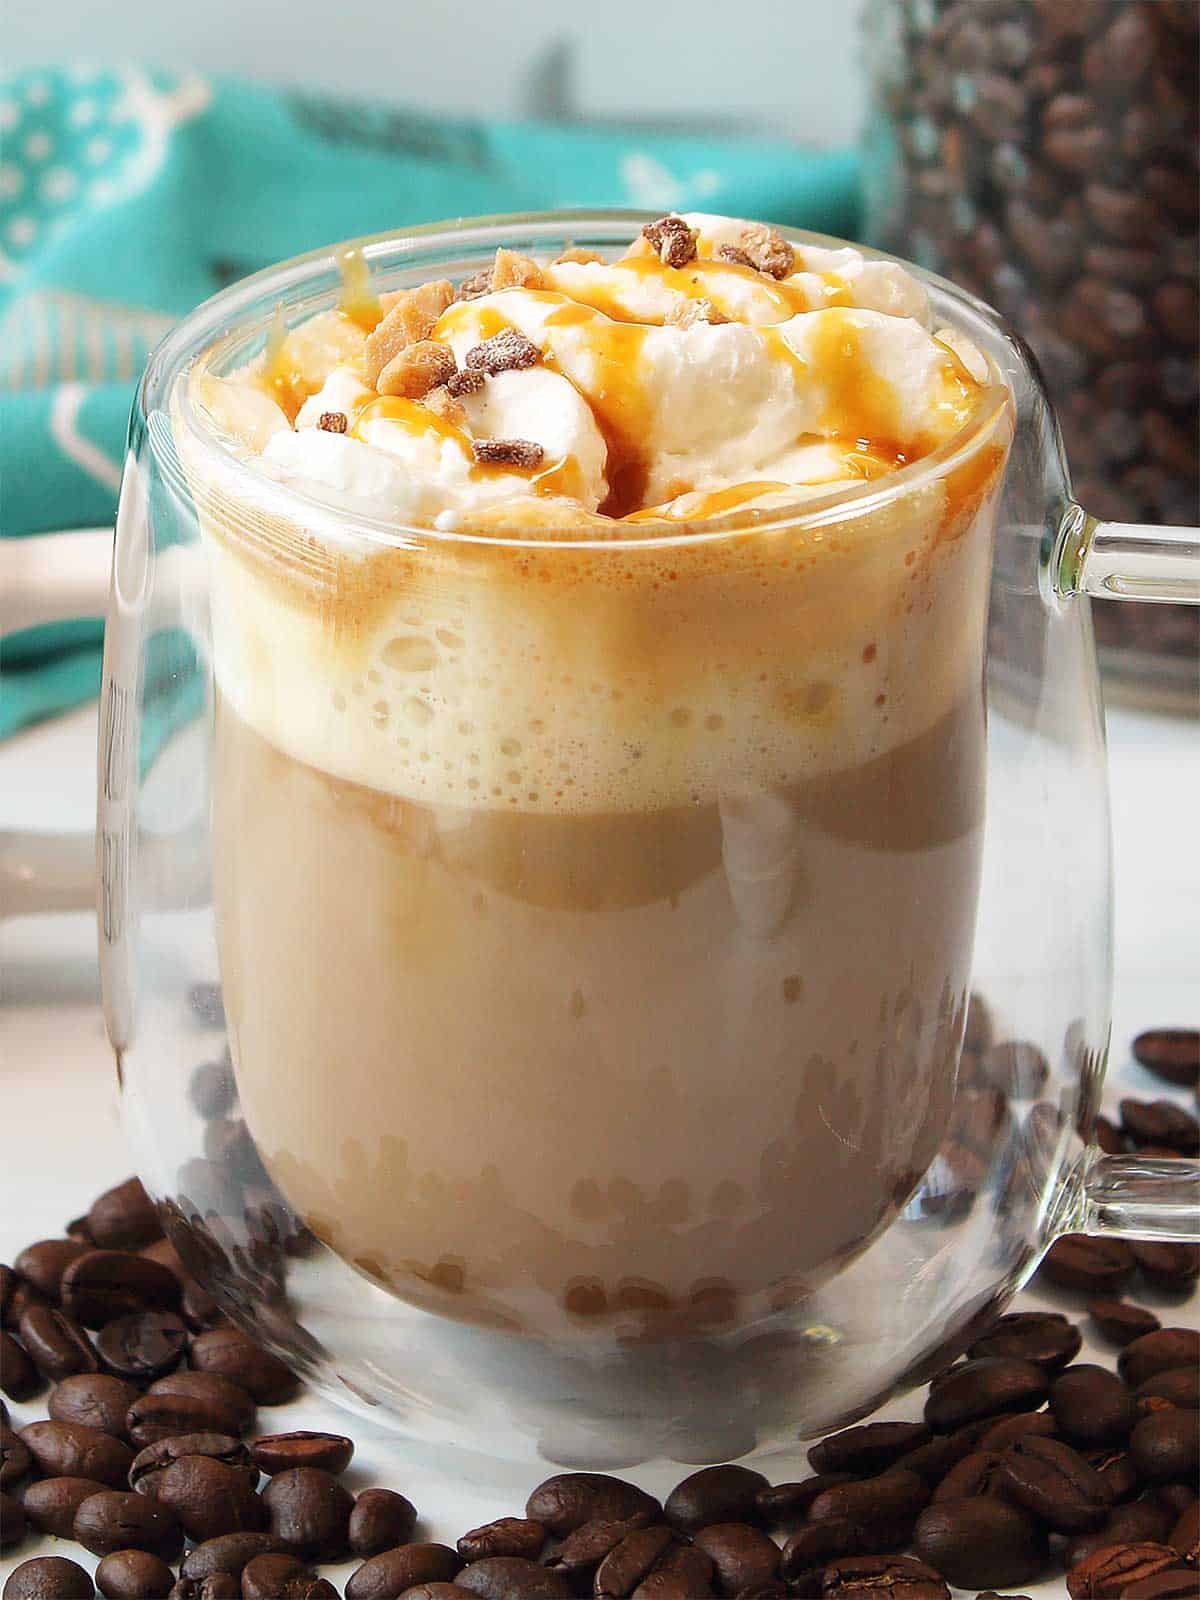 Copycat Starbucks Creme Brulee Latte with whipped cream and toffee bits.